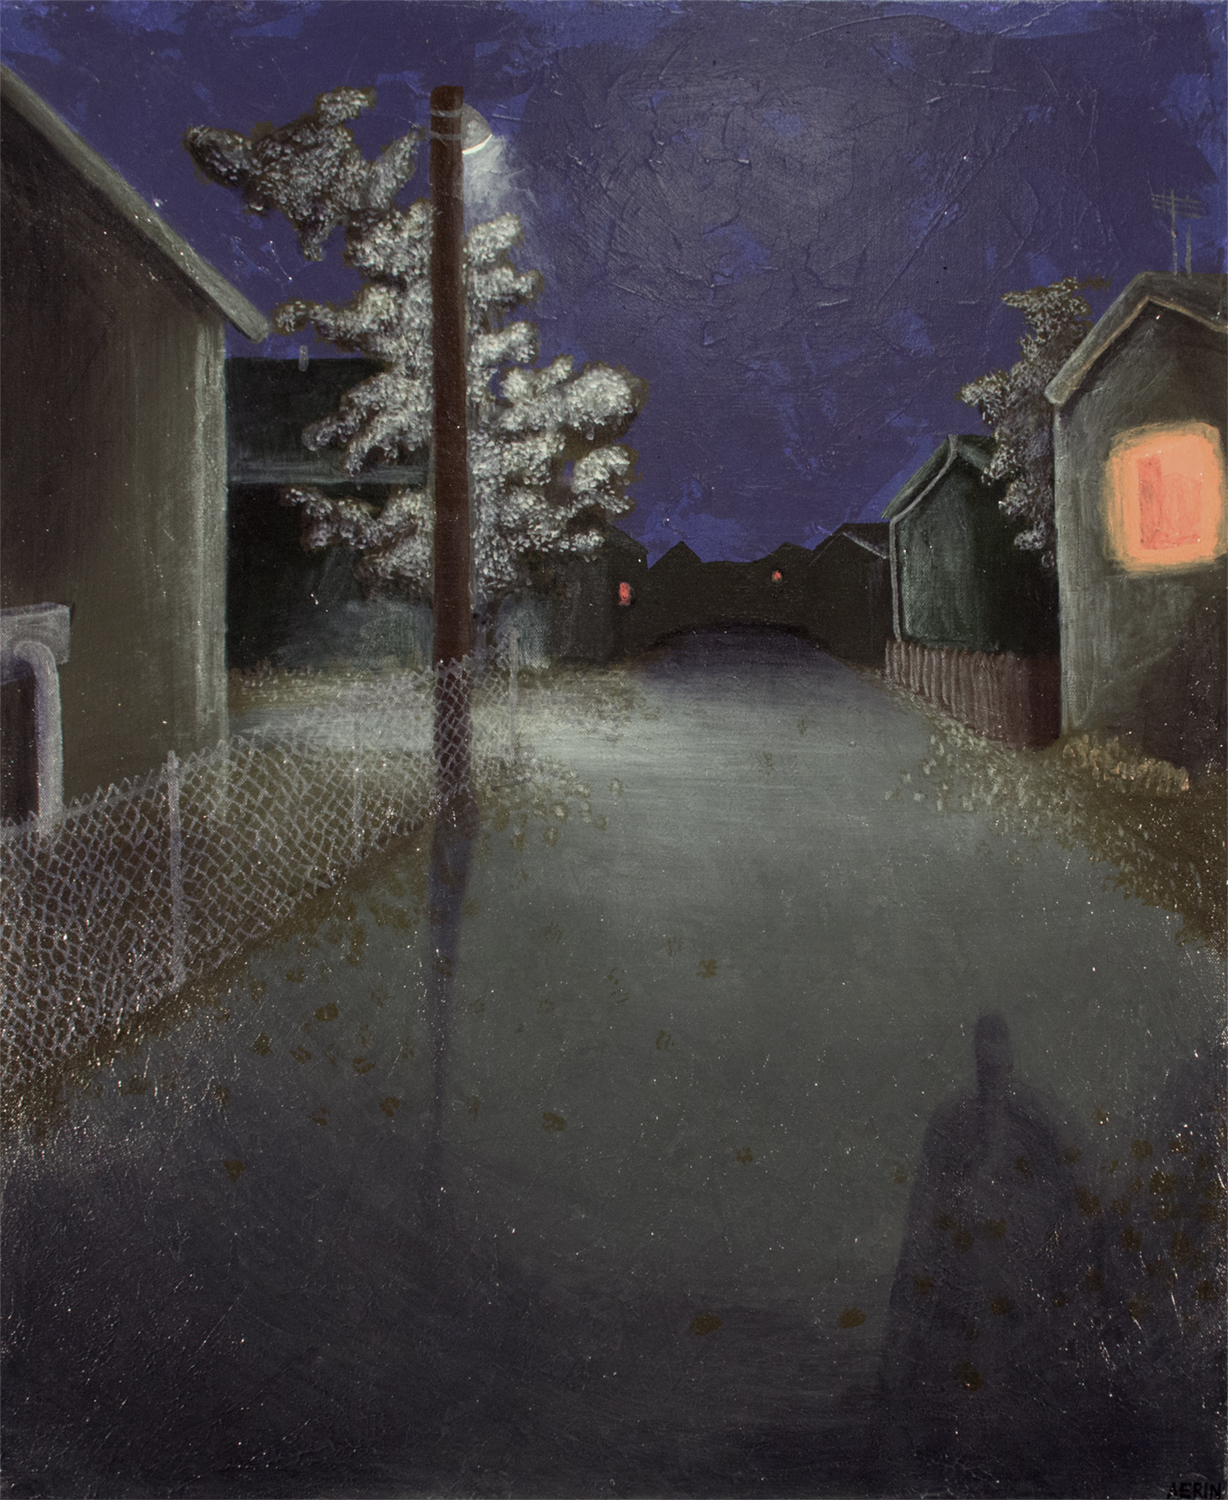 a quiet night time image of a side street with houses, some with their windows lit, courtesy of the artist